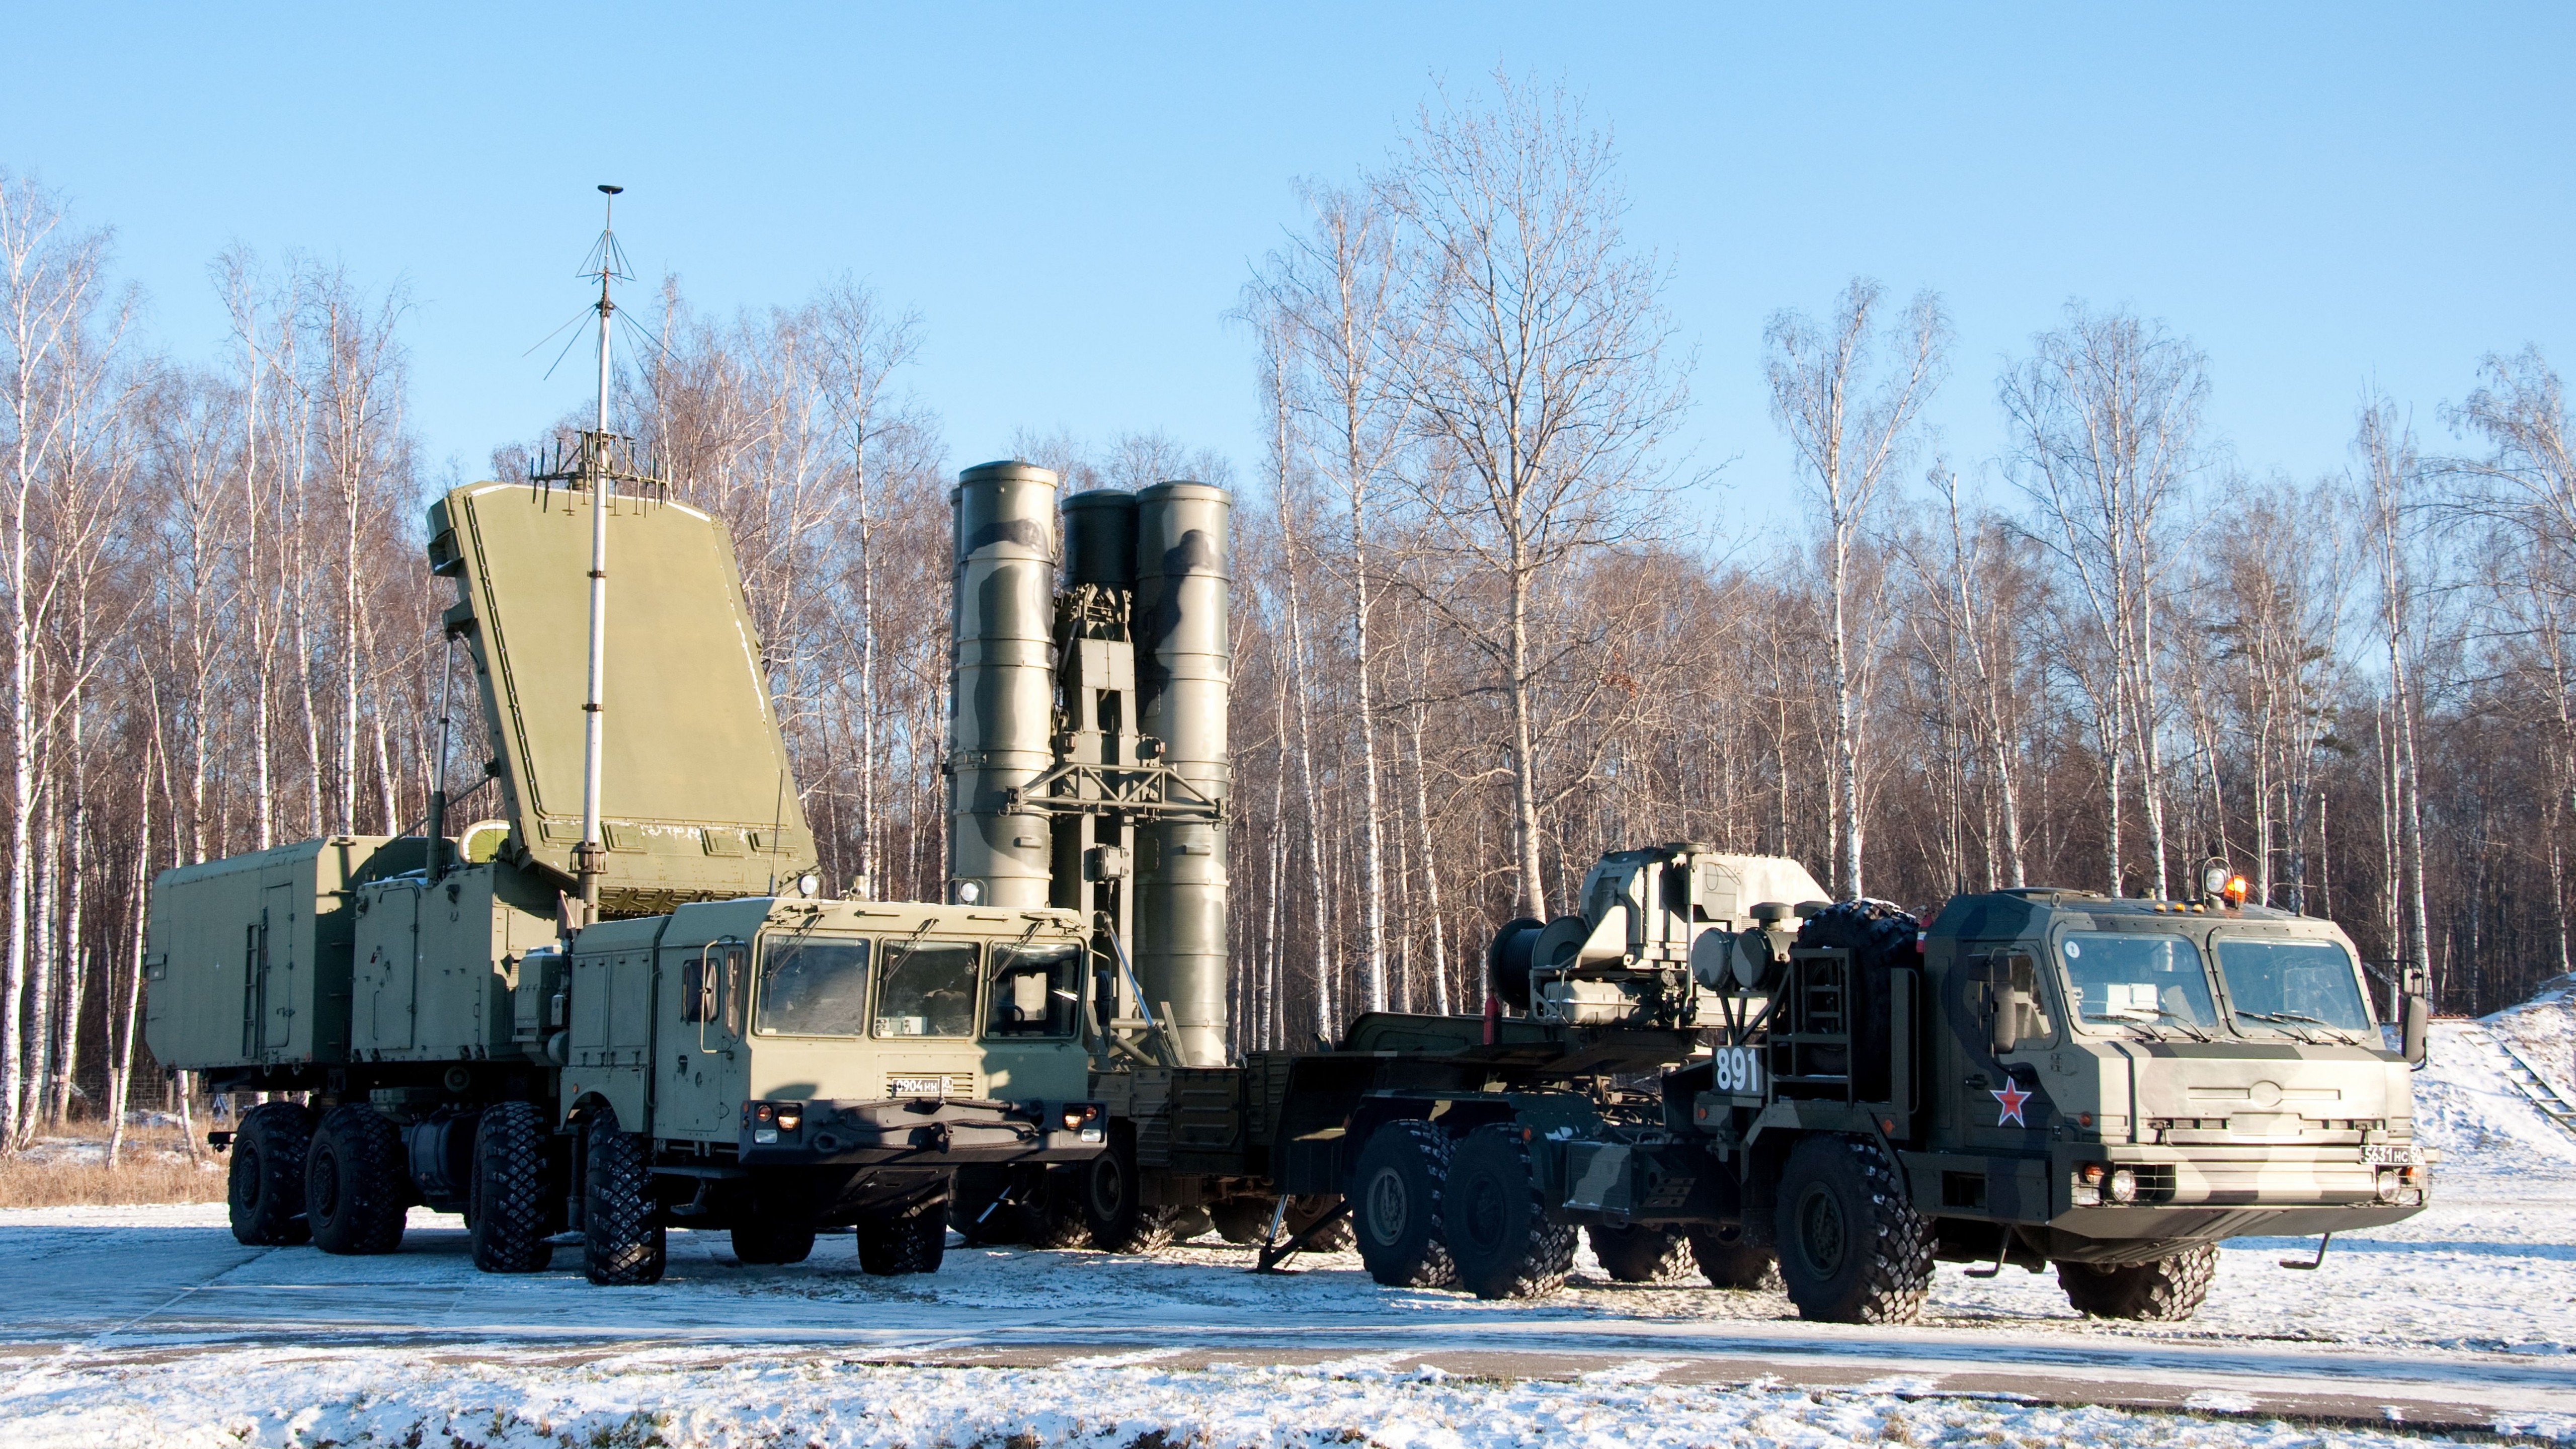 Wallpaper S Triumf, Missile, Growler, SA Anti Aircraft, Weapon, Russian Armed Forces, SAM System, Russia, Snow, Military